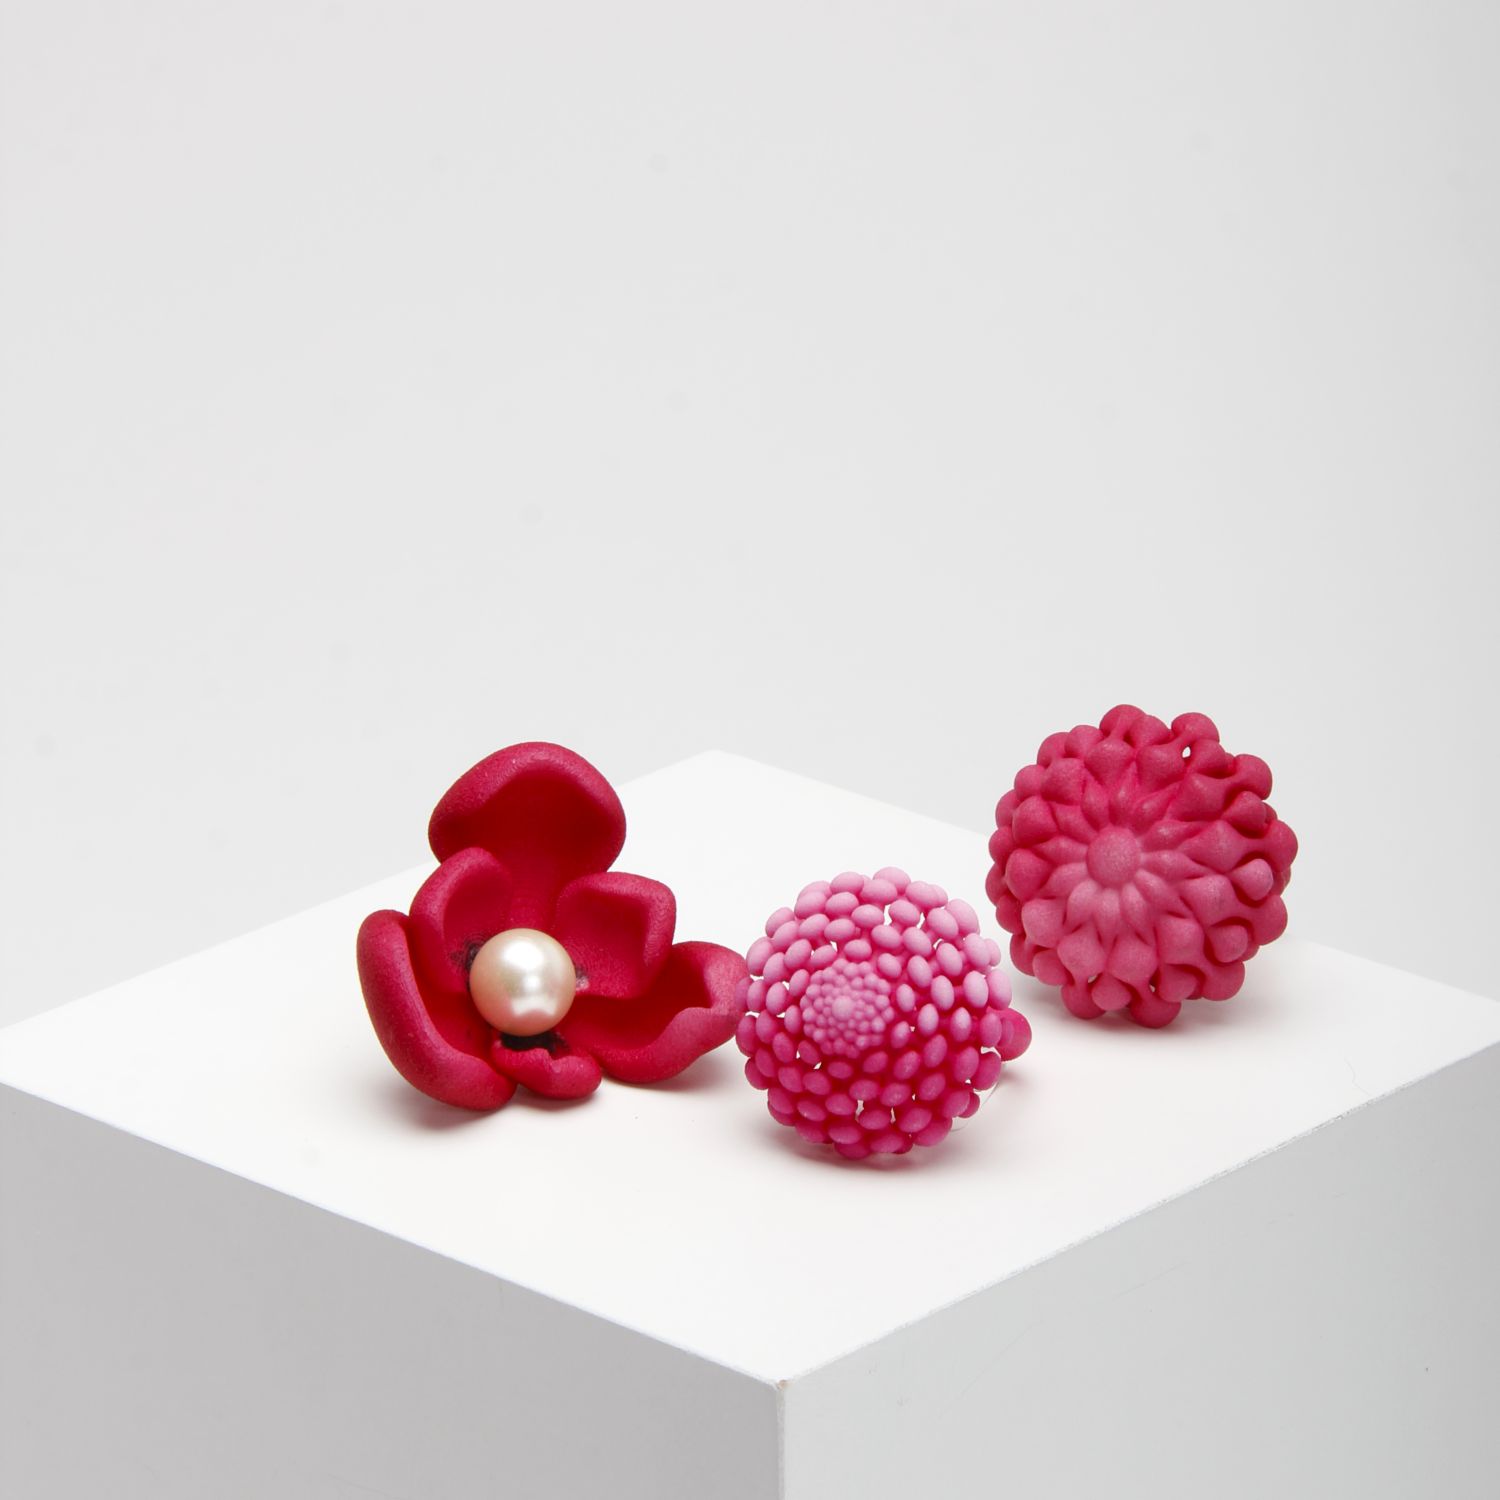 Kormar: Small Geometric Bloom Ring Product Image 4 of 5